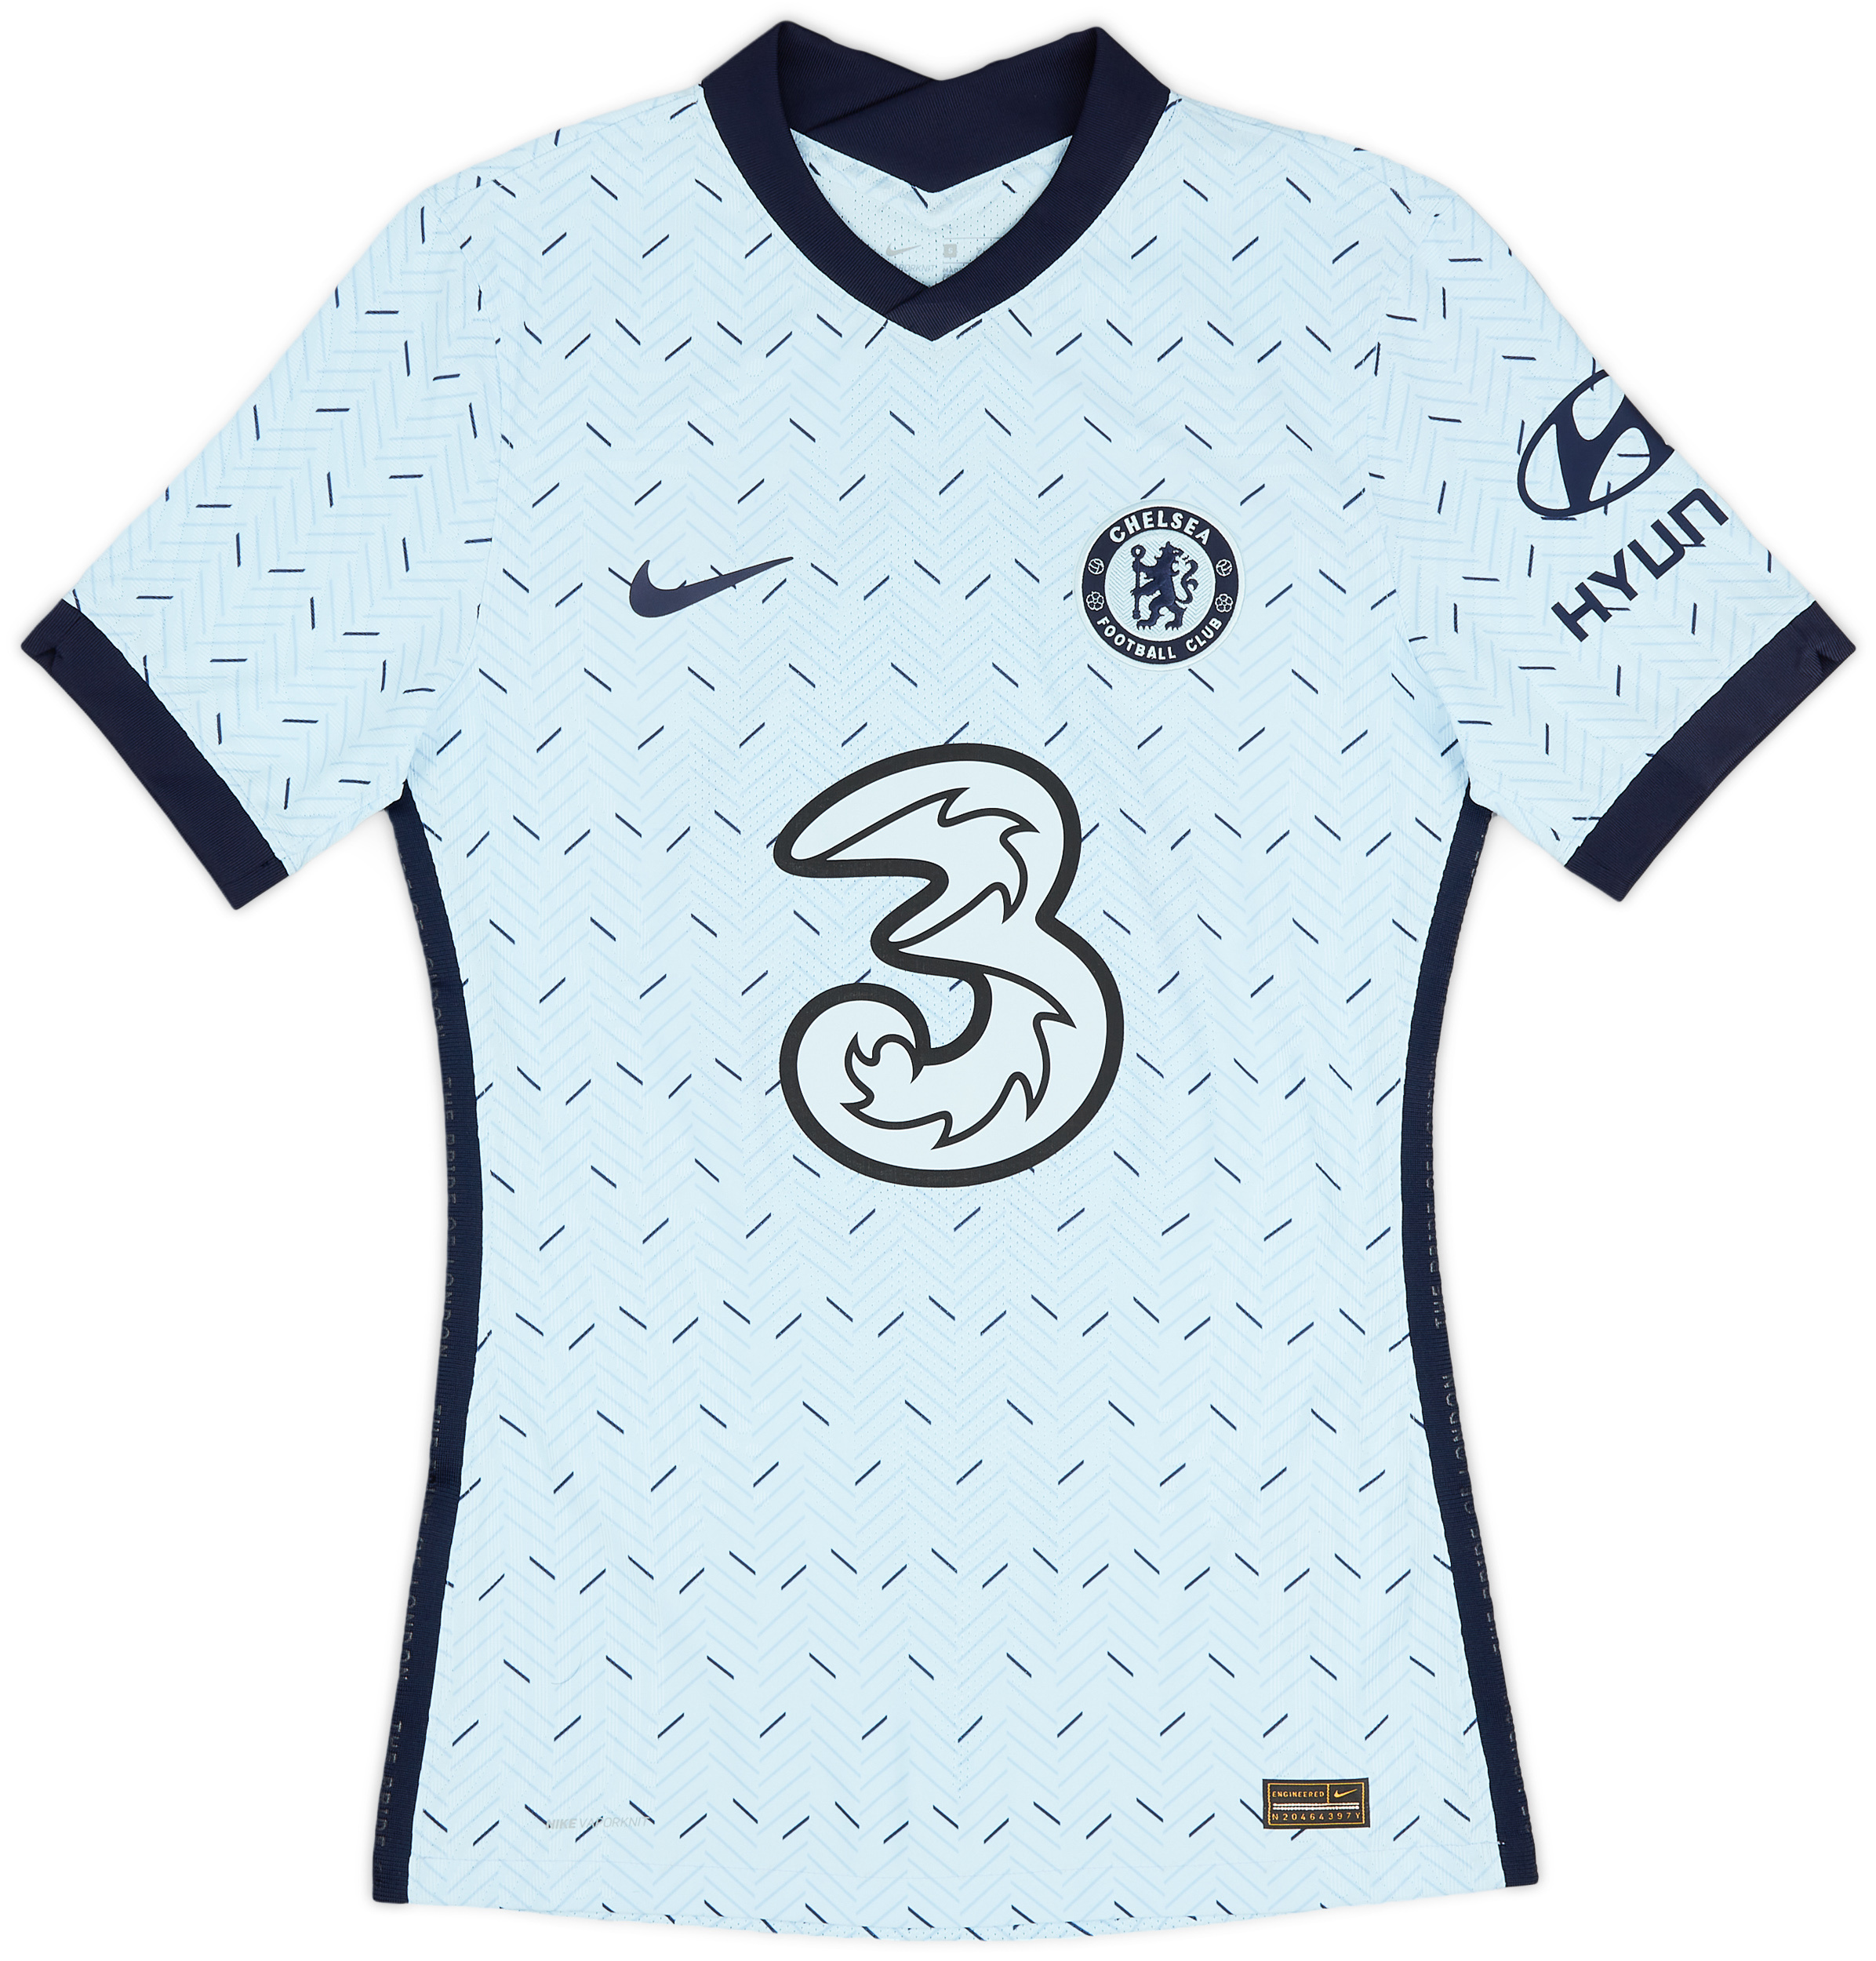 2020-21 Chelsea Player Issue Away Shirt ()